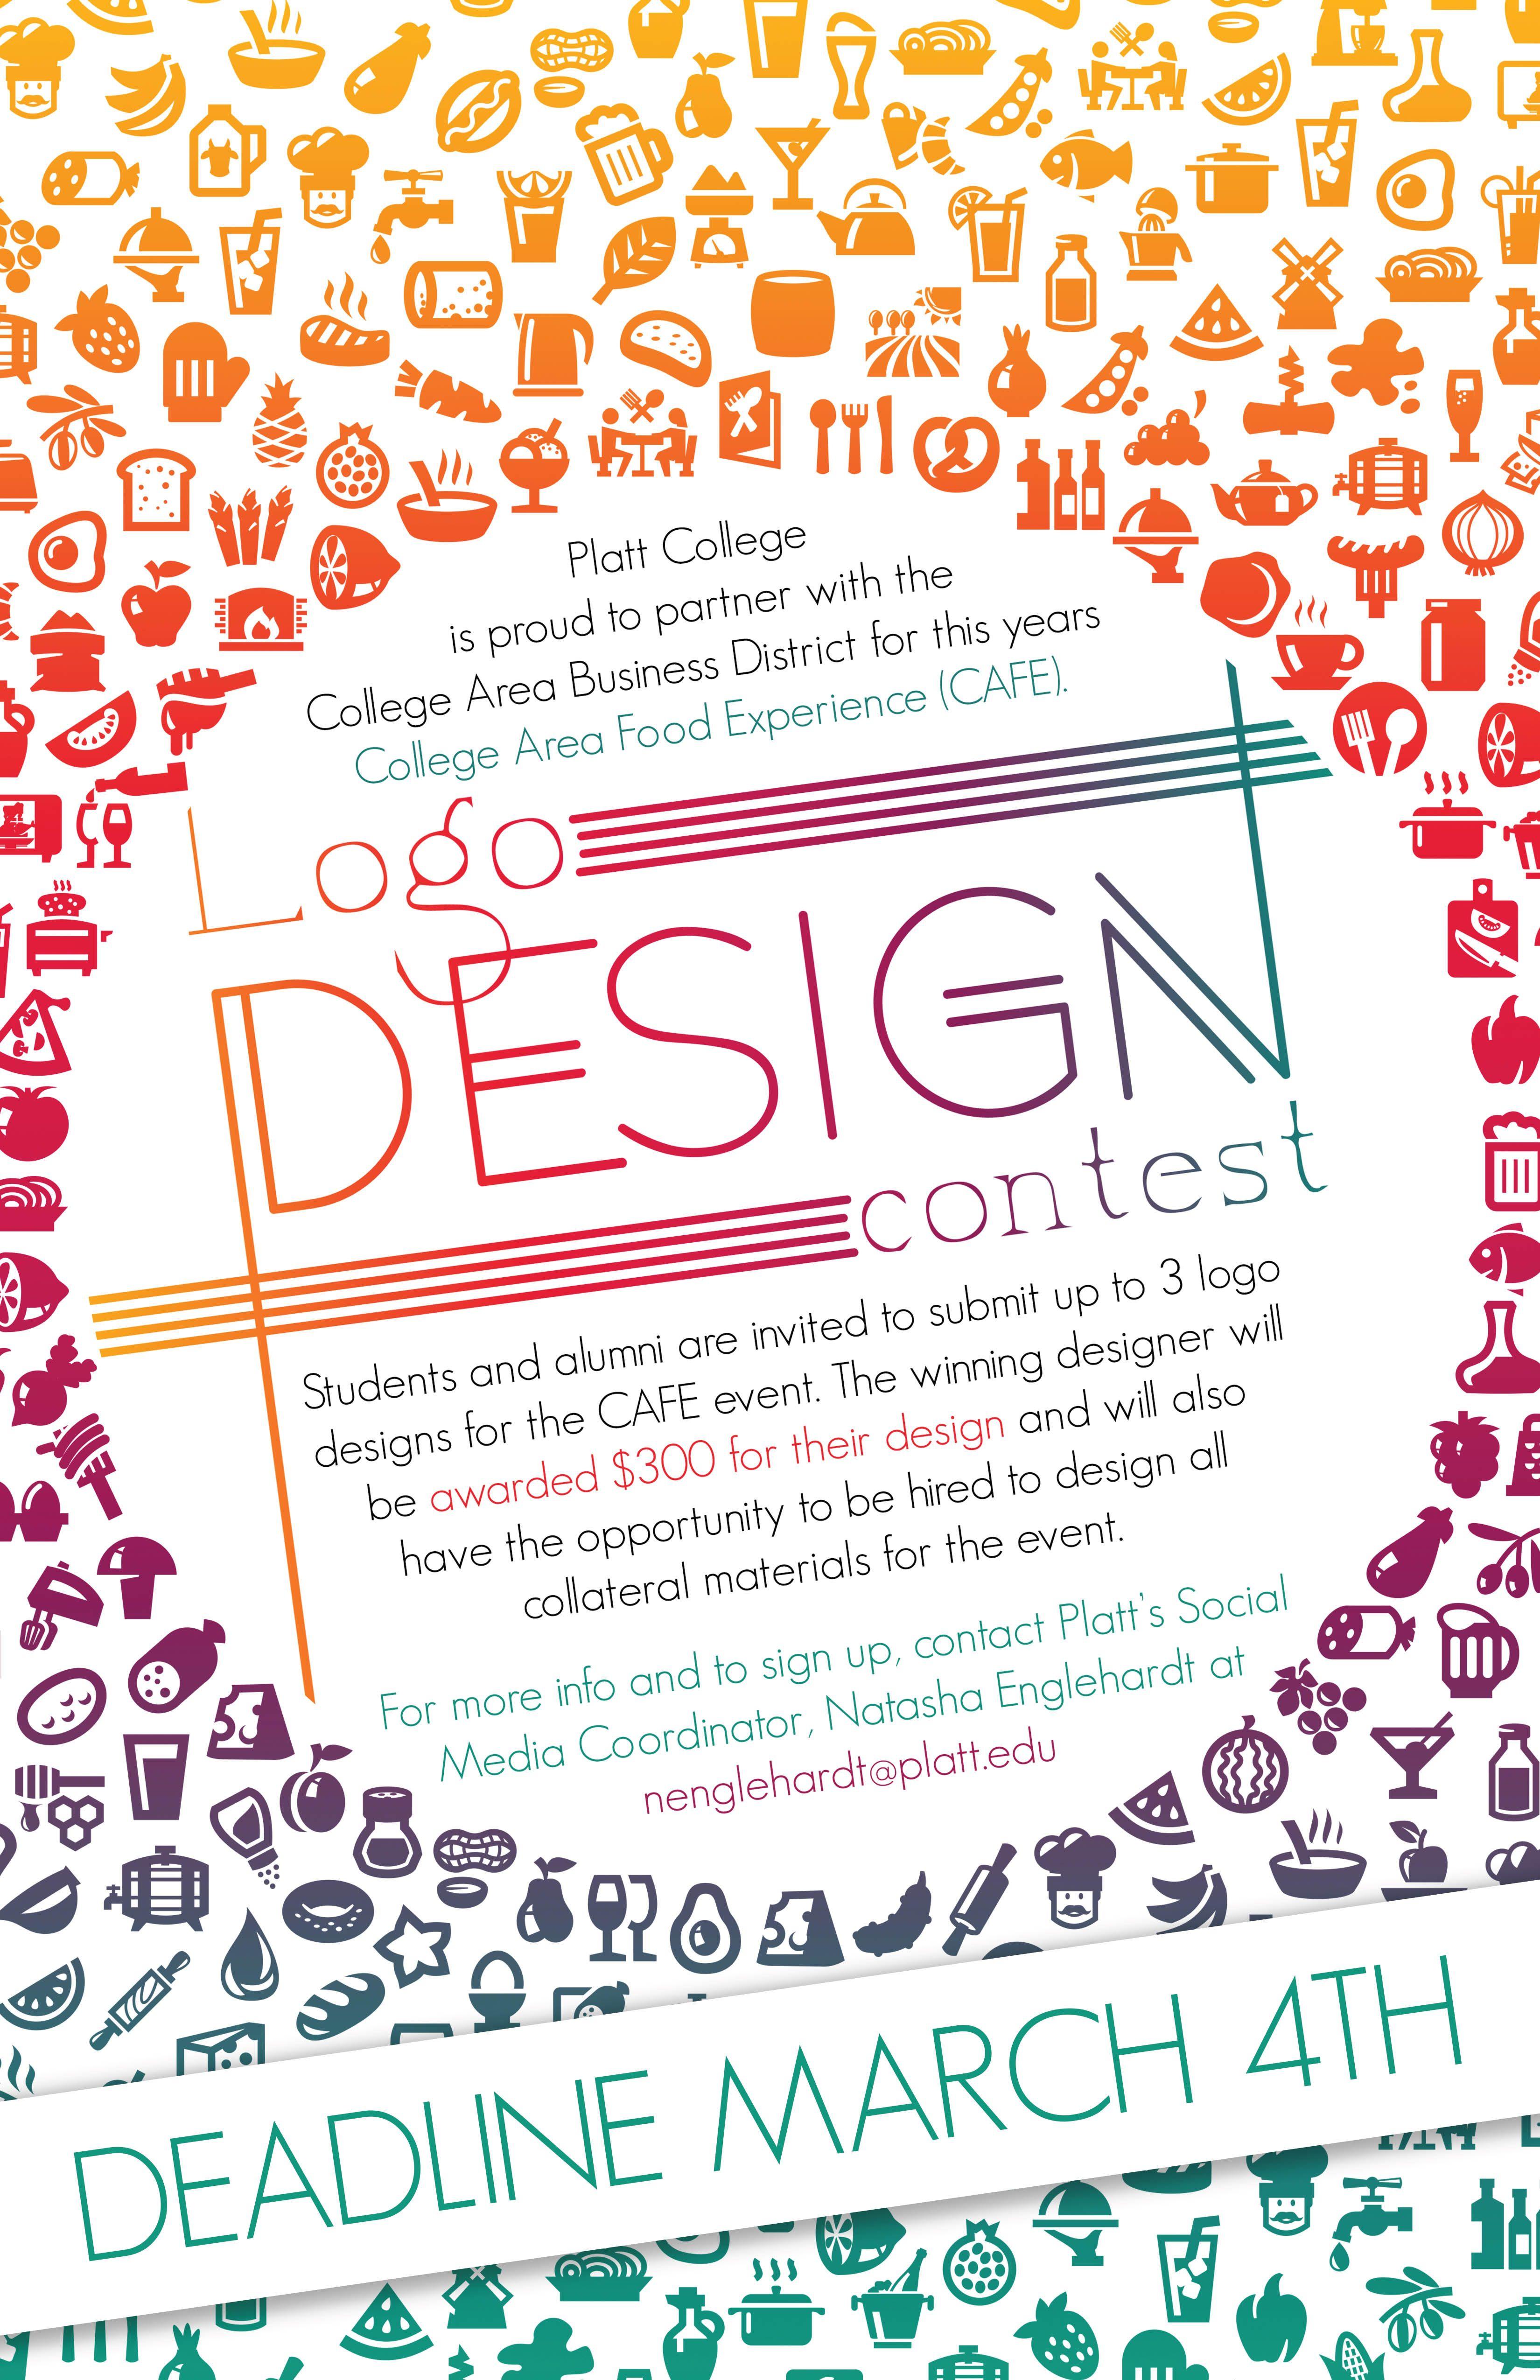 Contest Logo - Logo Design Contest for the College Area Food Experience